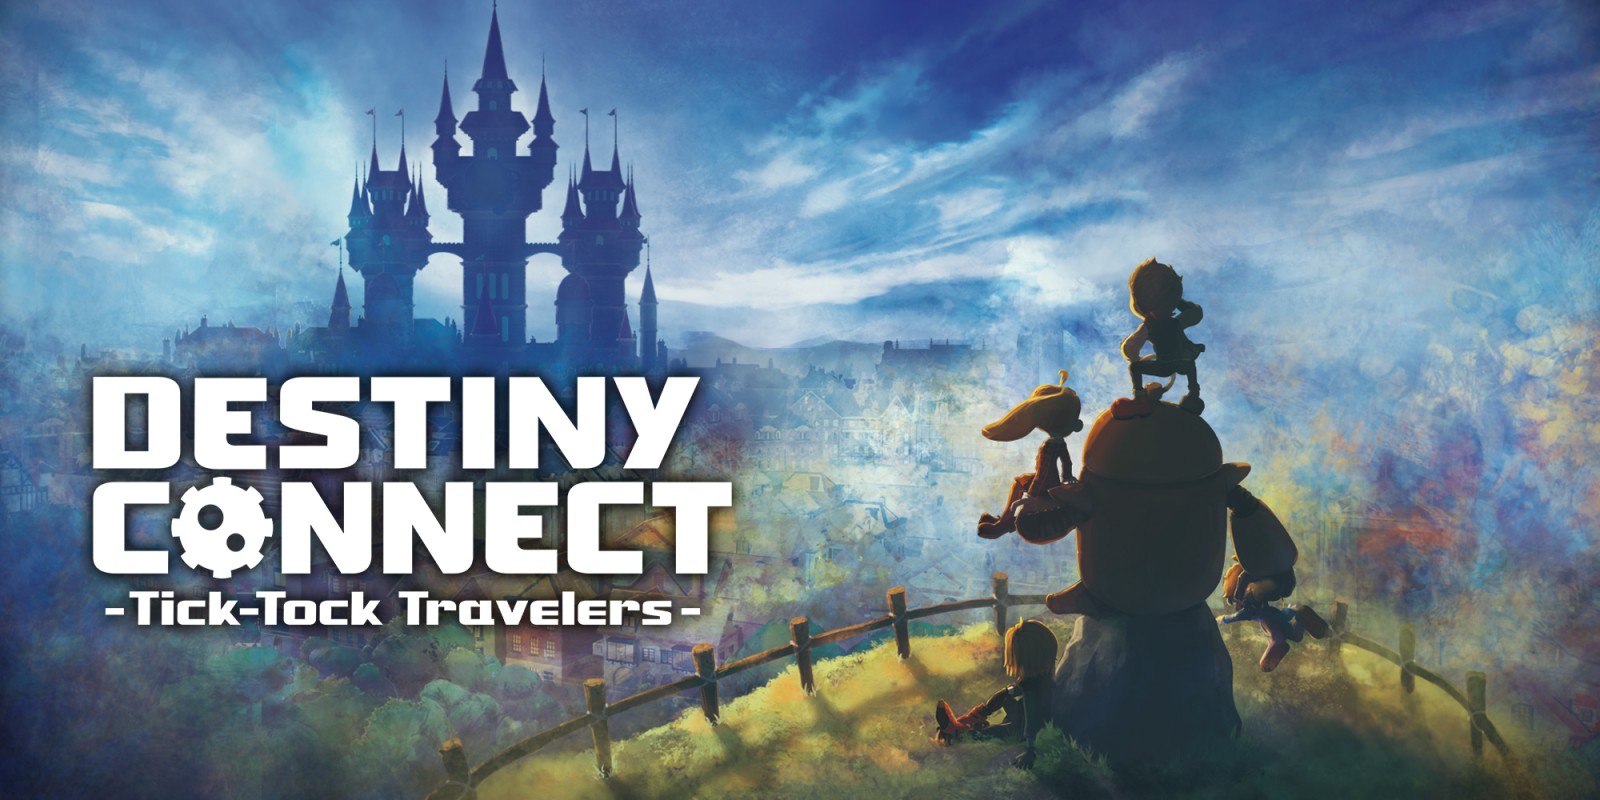 Destiny Connect: Tick-Tock Travelers phát hành trailer cho PS4, Switch